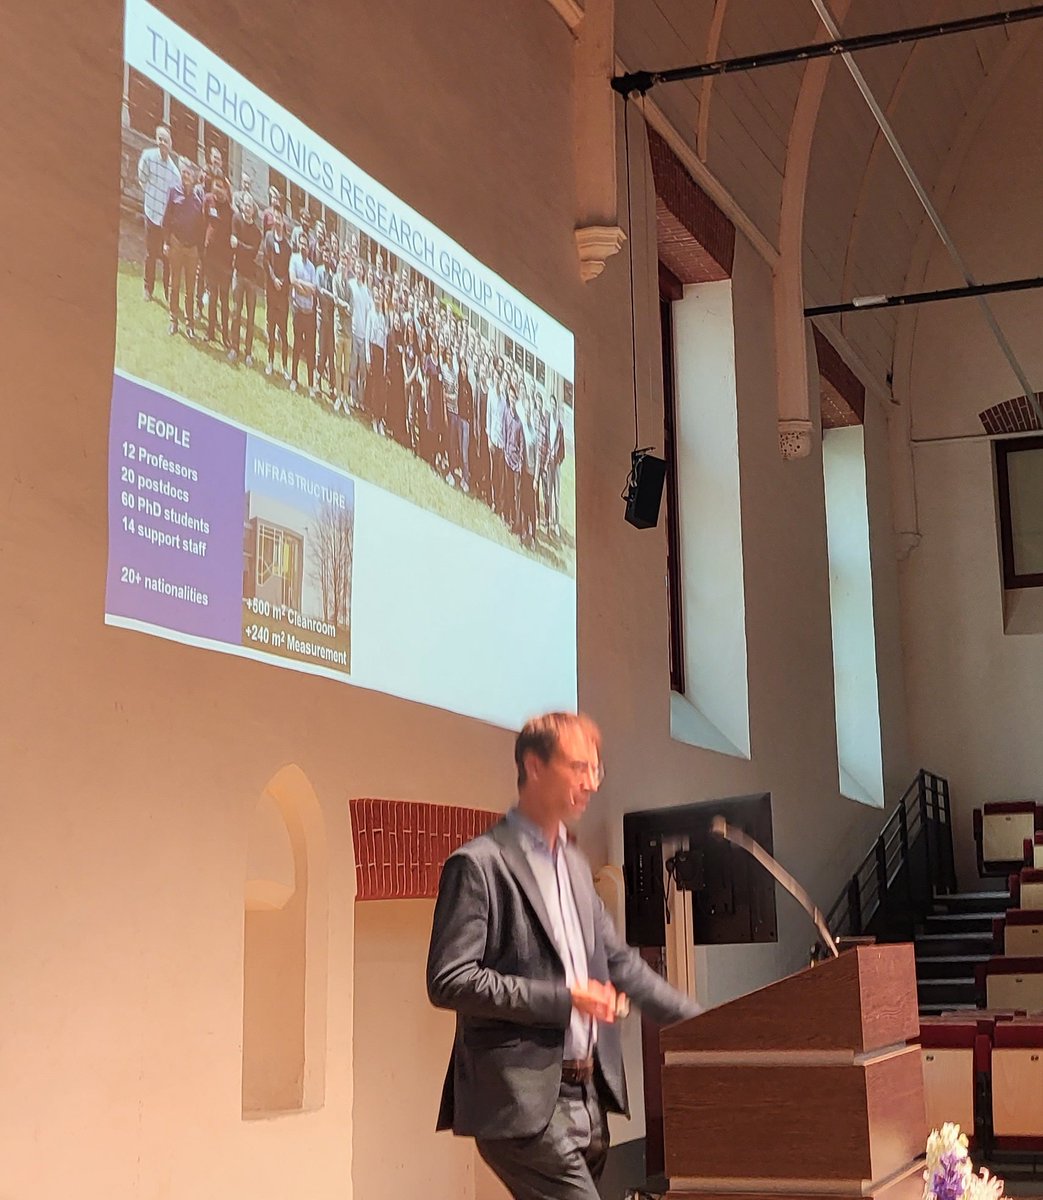 Professor @DThourhout , new chair of the @PhotonicsUGent research group, warmly welcomes the many attendees to this unique @LightAndEnlightenment symposium. We have come a long way since we made our first photonic chips. @ugent @imec_int